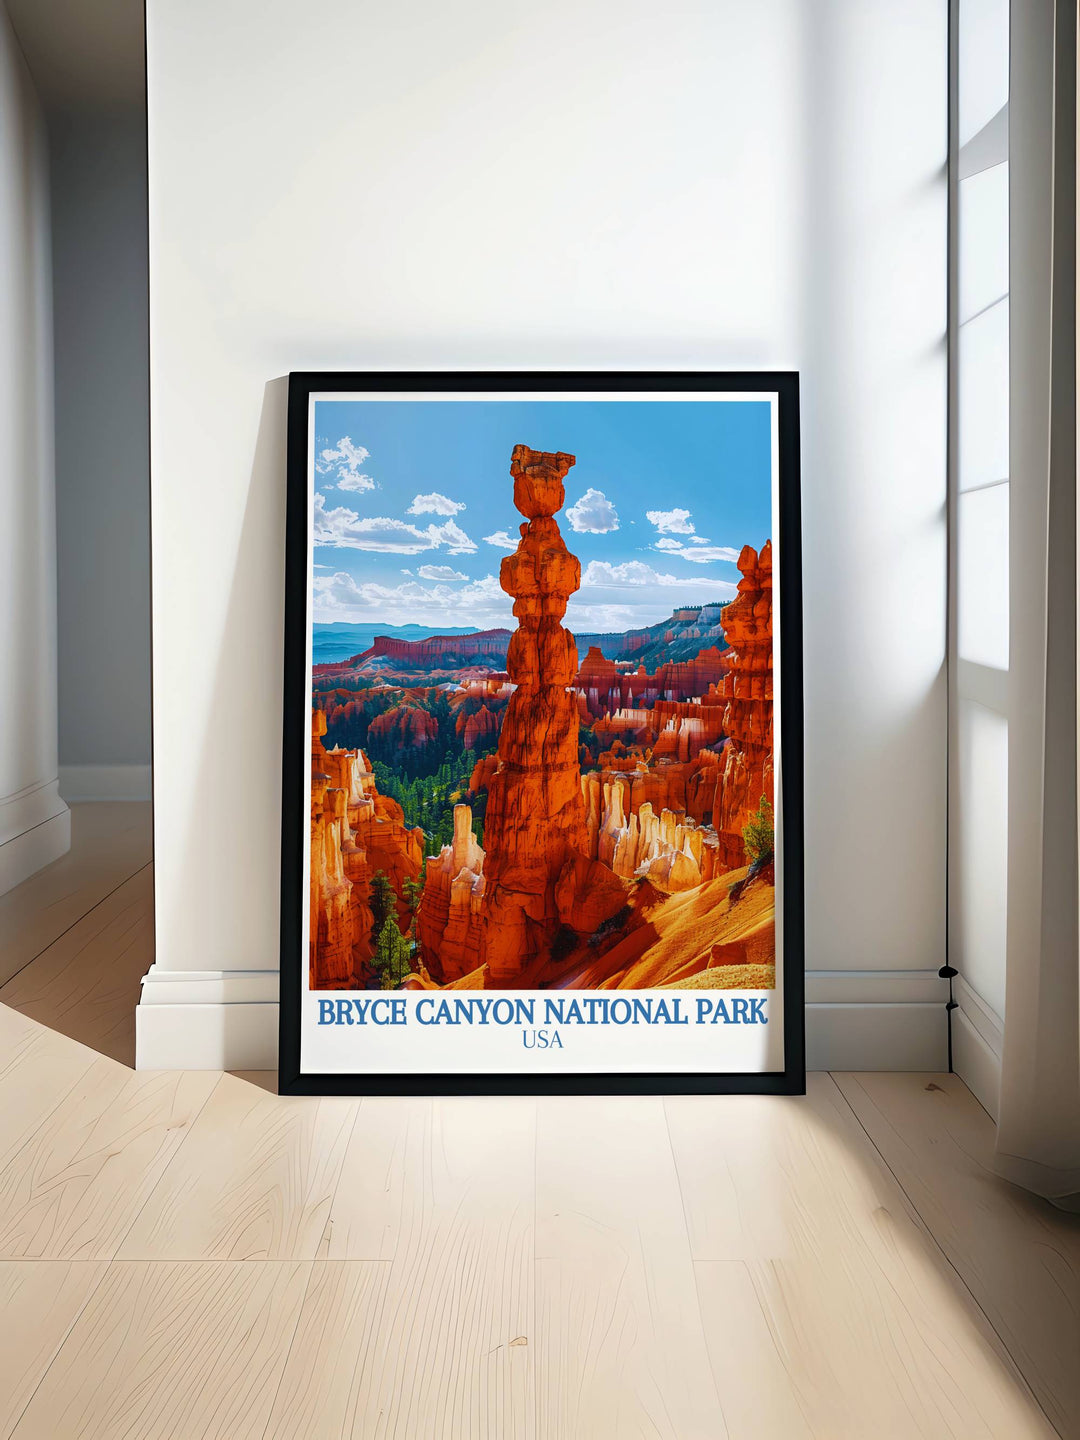 Beautiful Bryce Canyon print showcasing the iconic Thors Hammer rock formation. Perfect for adding a touch of natural beauty to your home decor. High quality digital download available for easy at home printing and immediate enjoyment.